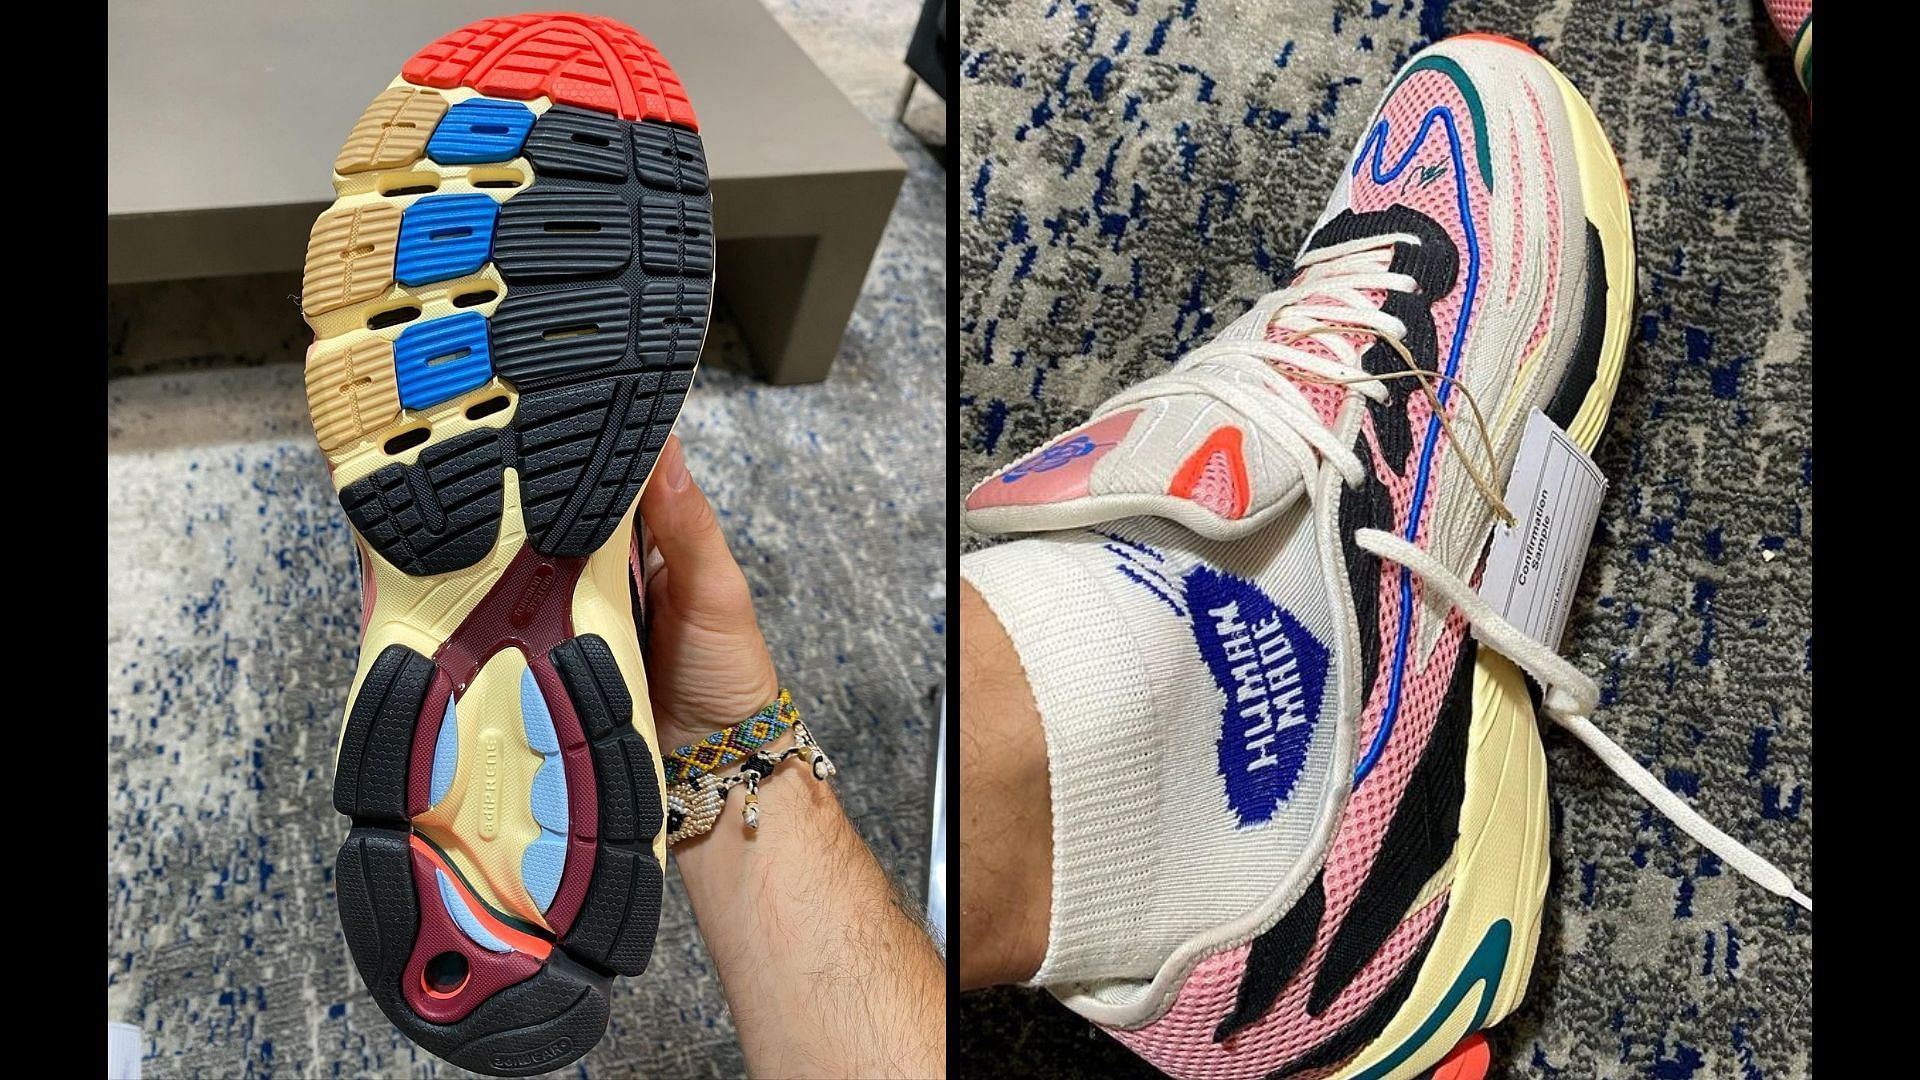 Where to buy Sean Wotherspoon x Adidas Orketro sneakers